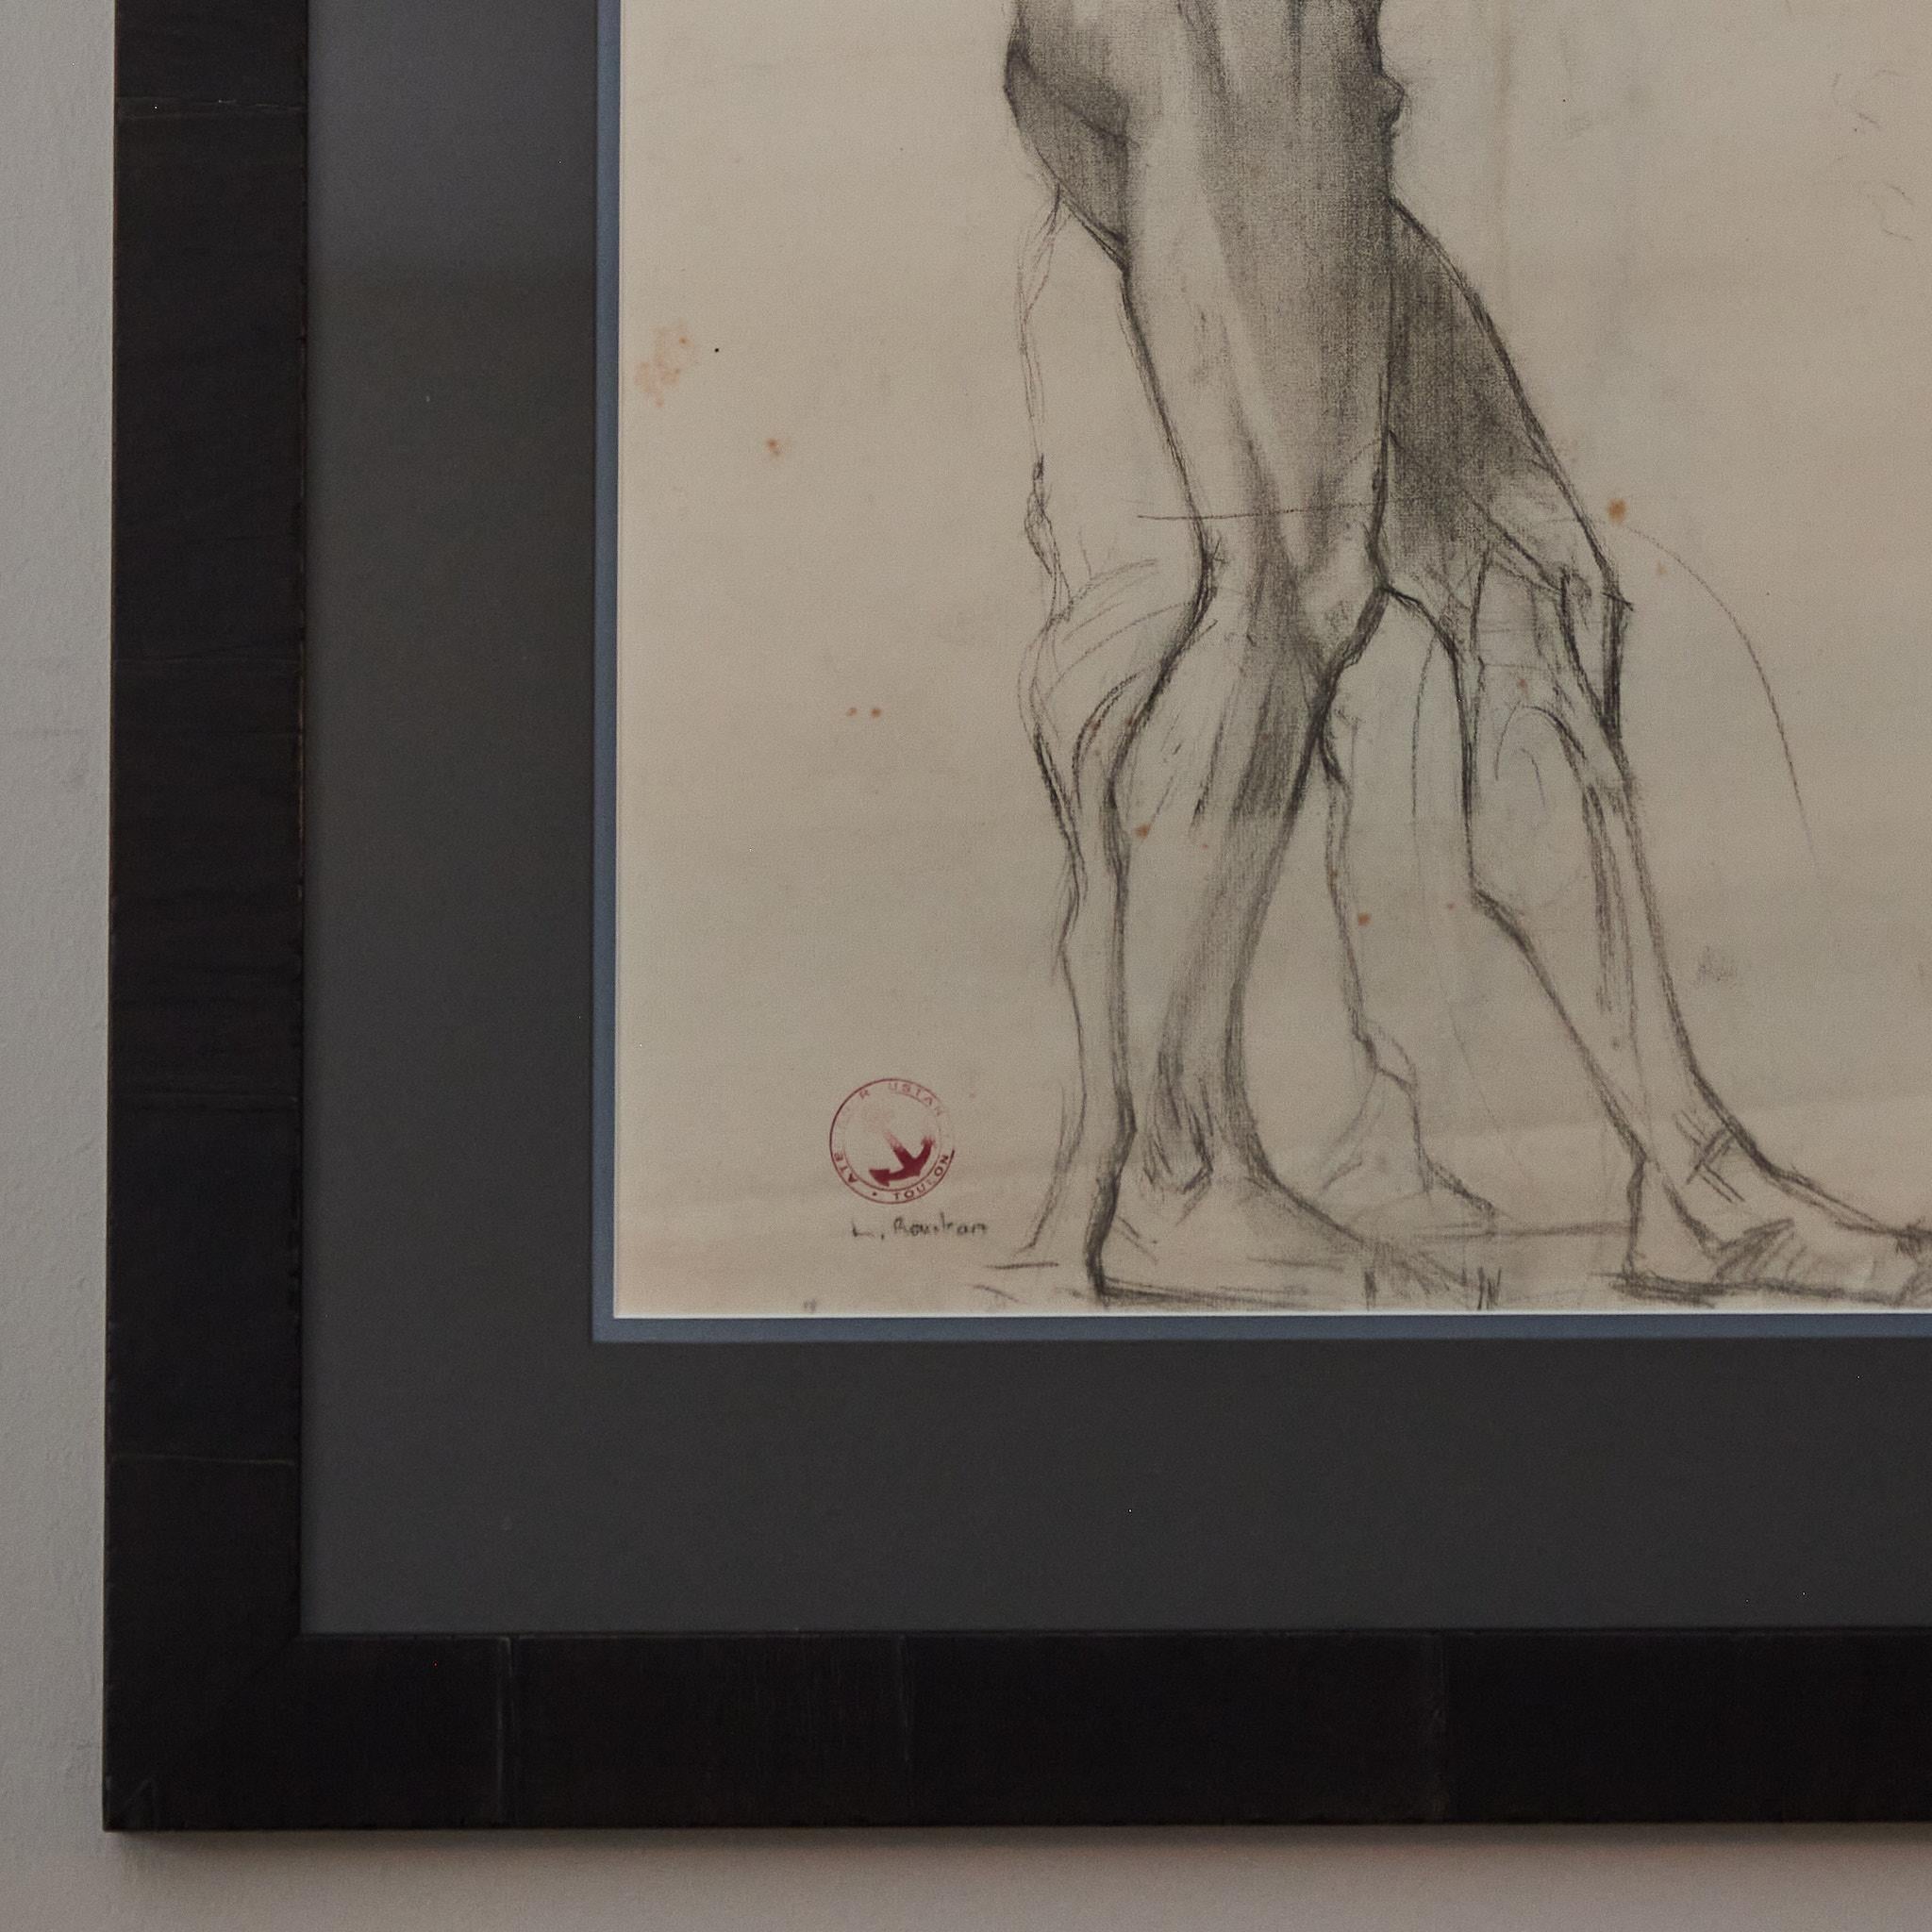 Early 20th-century charcoal drawing of standing nude male model in the classical tradition of the French Academy. Mounted in a custom wood frame, the image has a pensive quality, and a beautiful treatment of line and contour.

France, circa